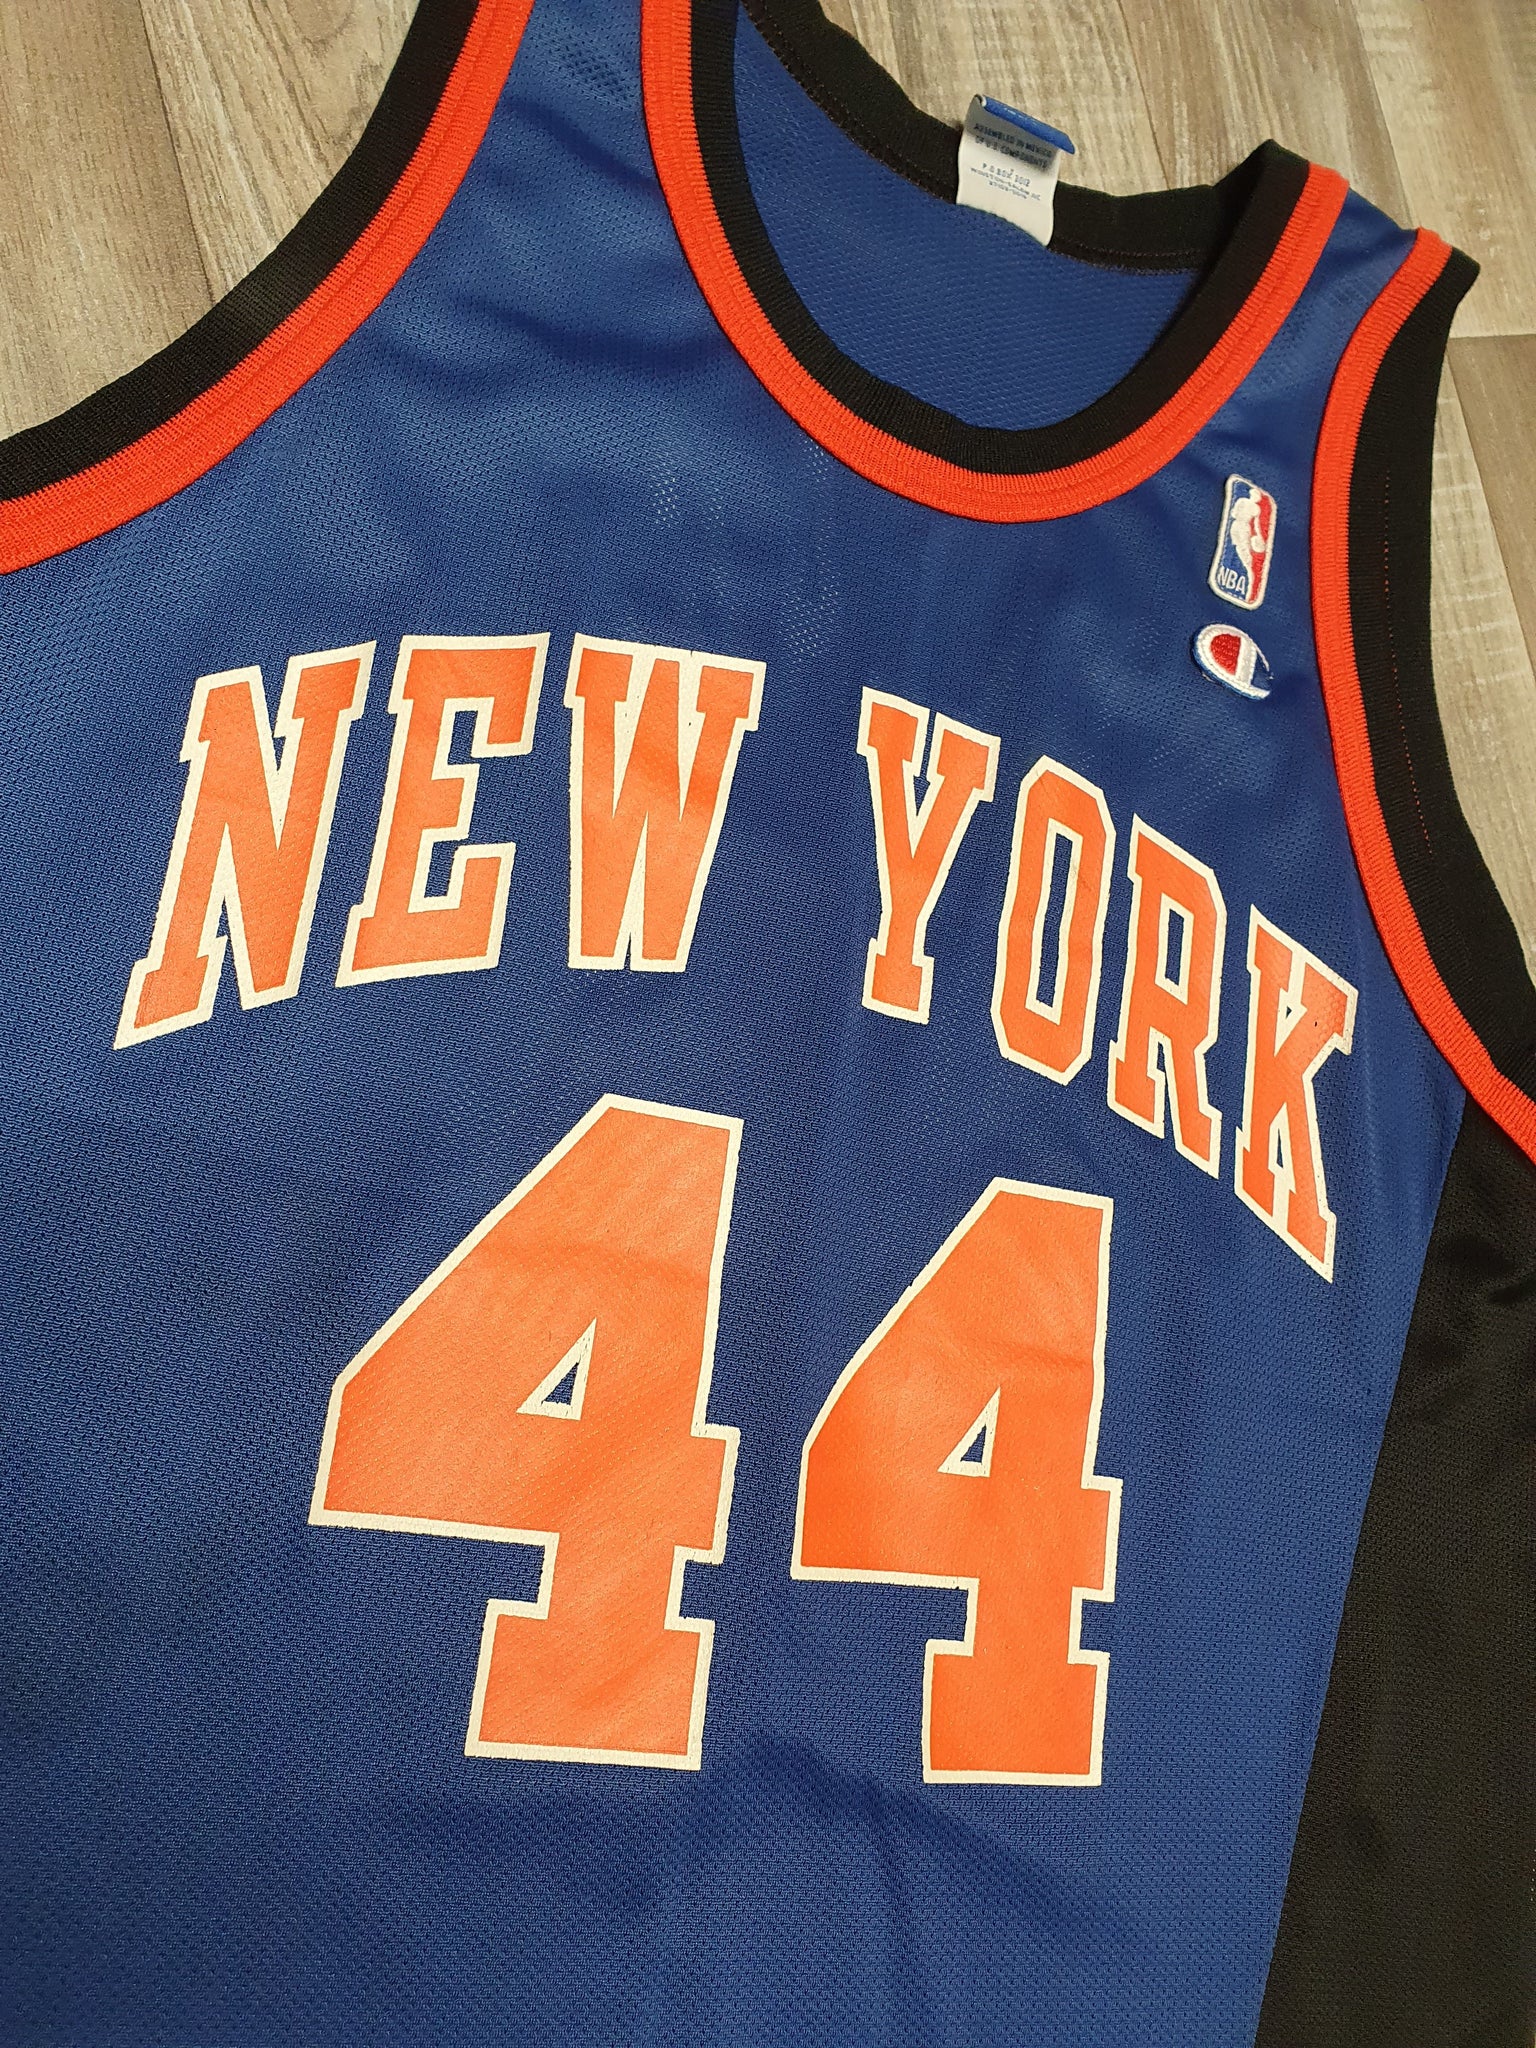 🏀 John Wallace New York Knicks Jersey Size Large – The Throwback